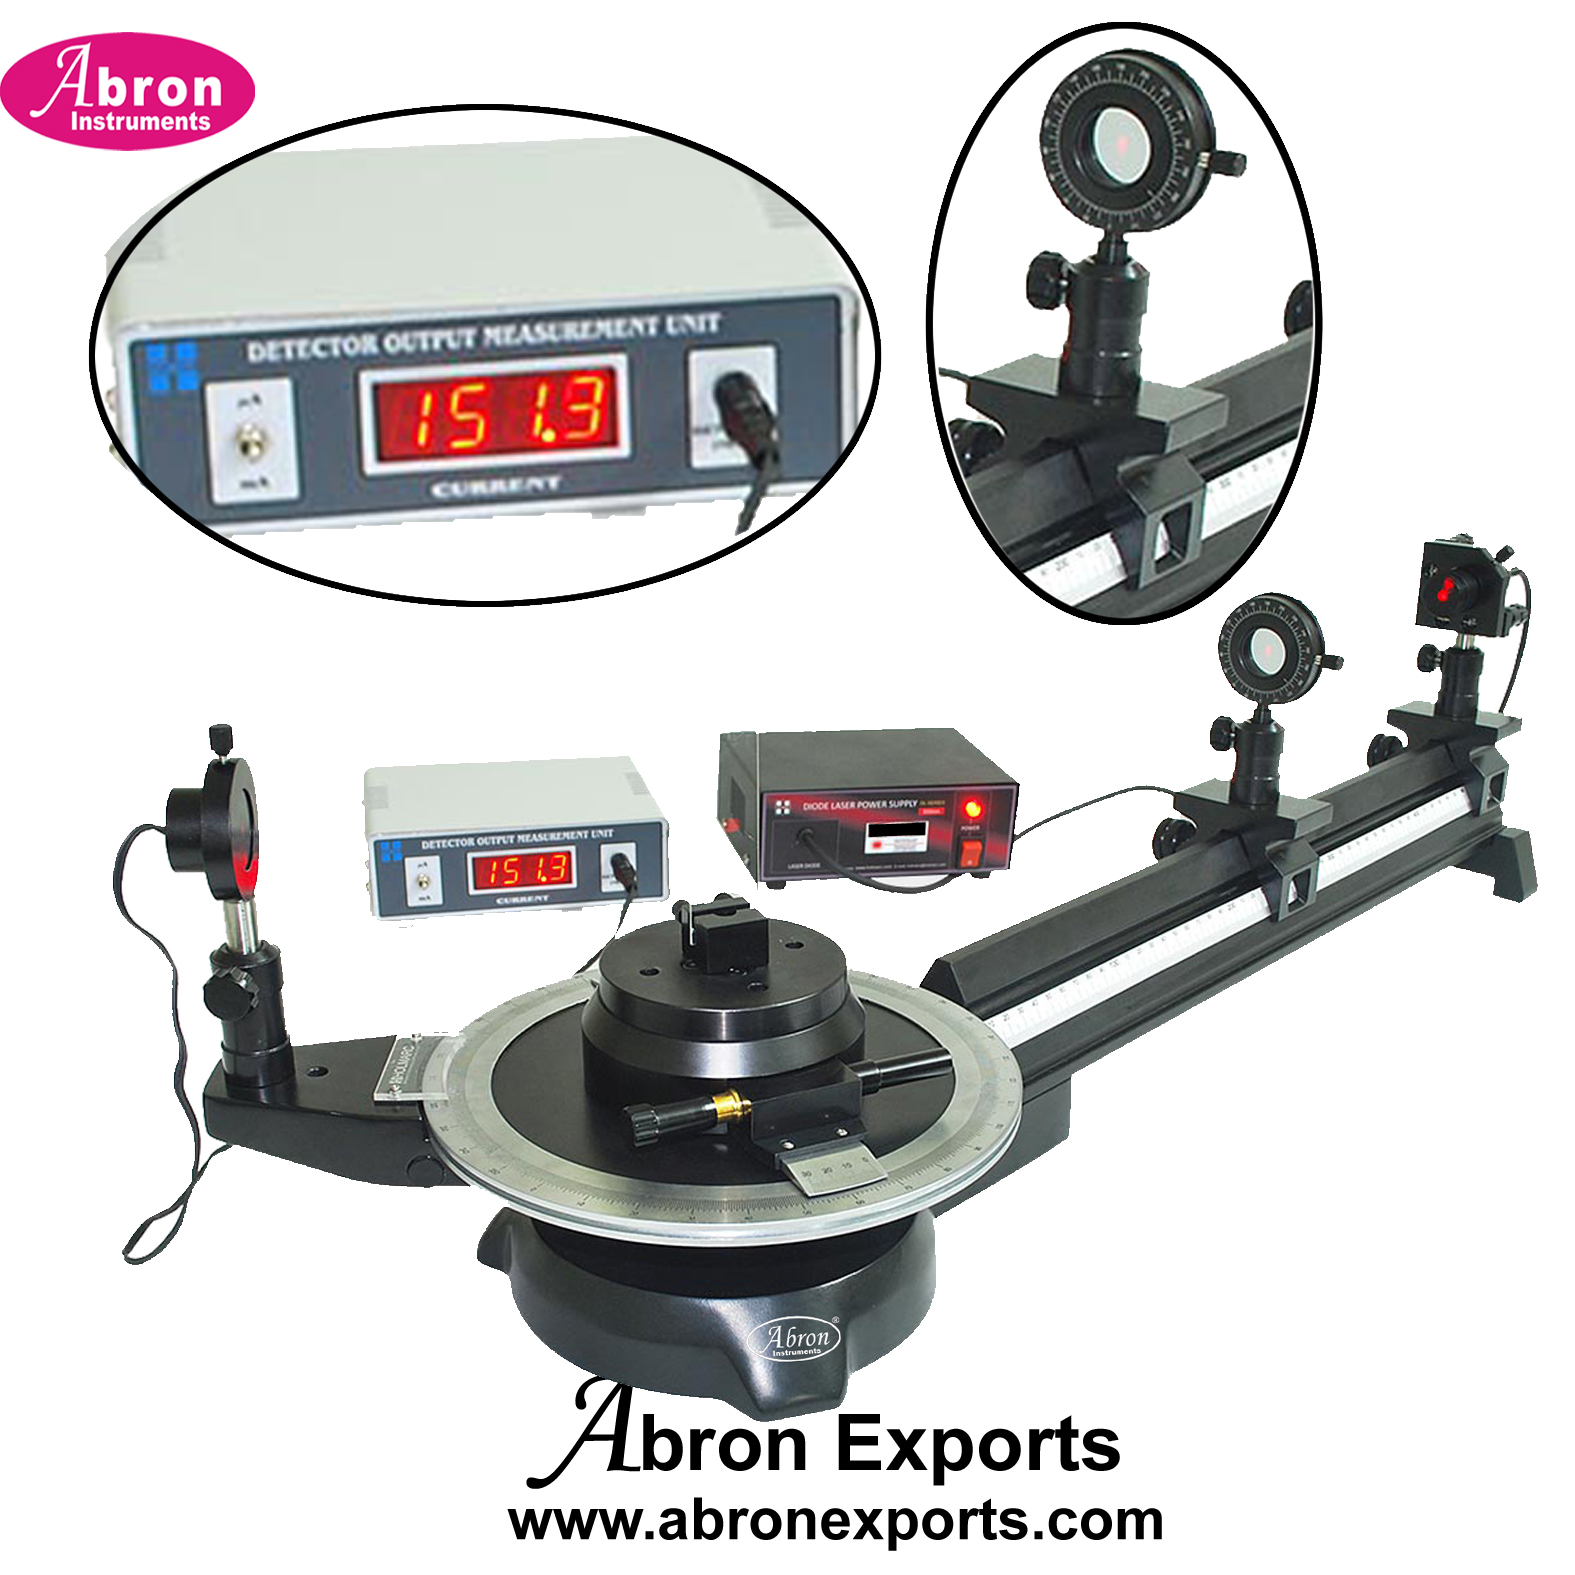 Brewsters Angle Digital Sensor Set Goniometer Spectrometer Special Arm With Camera Polarizer Analyser Rail Abron AE-1215DR 